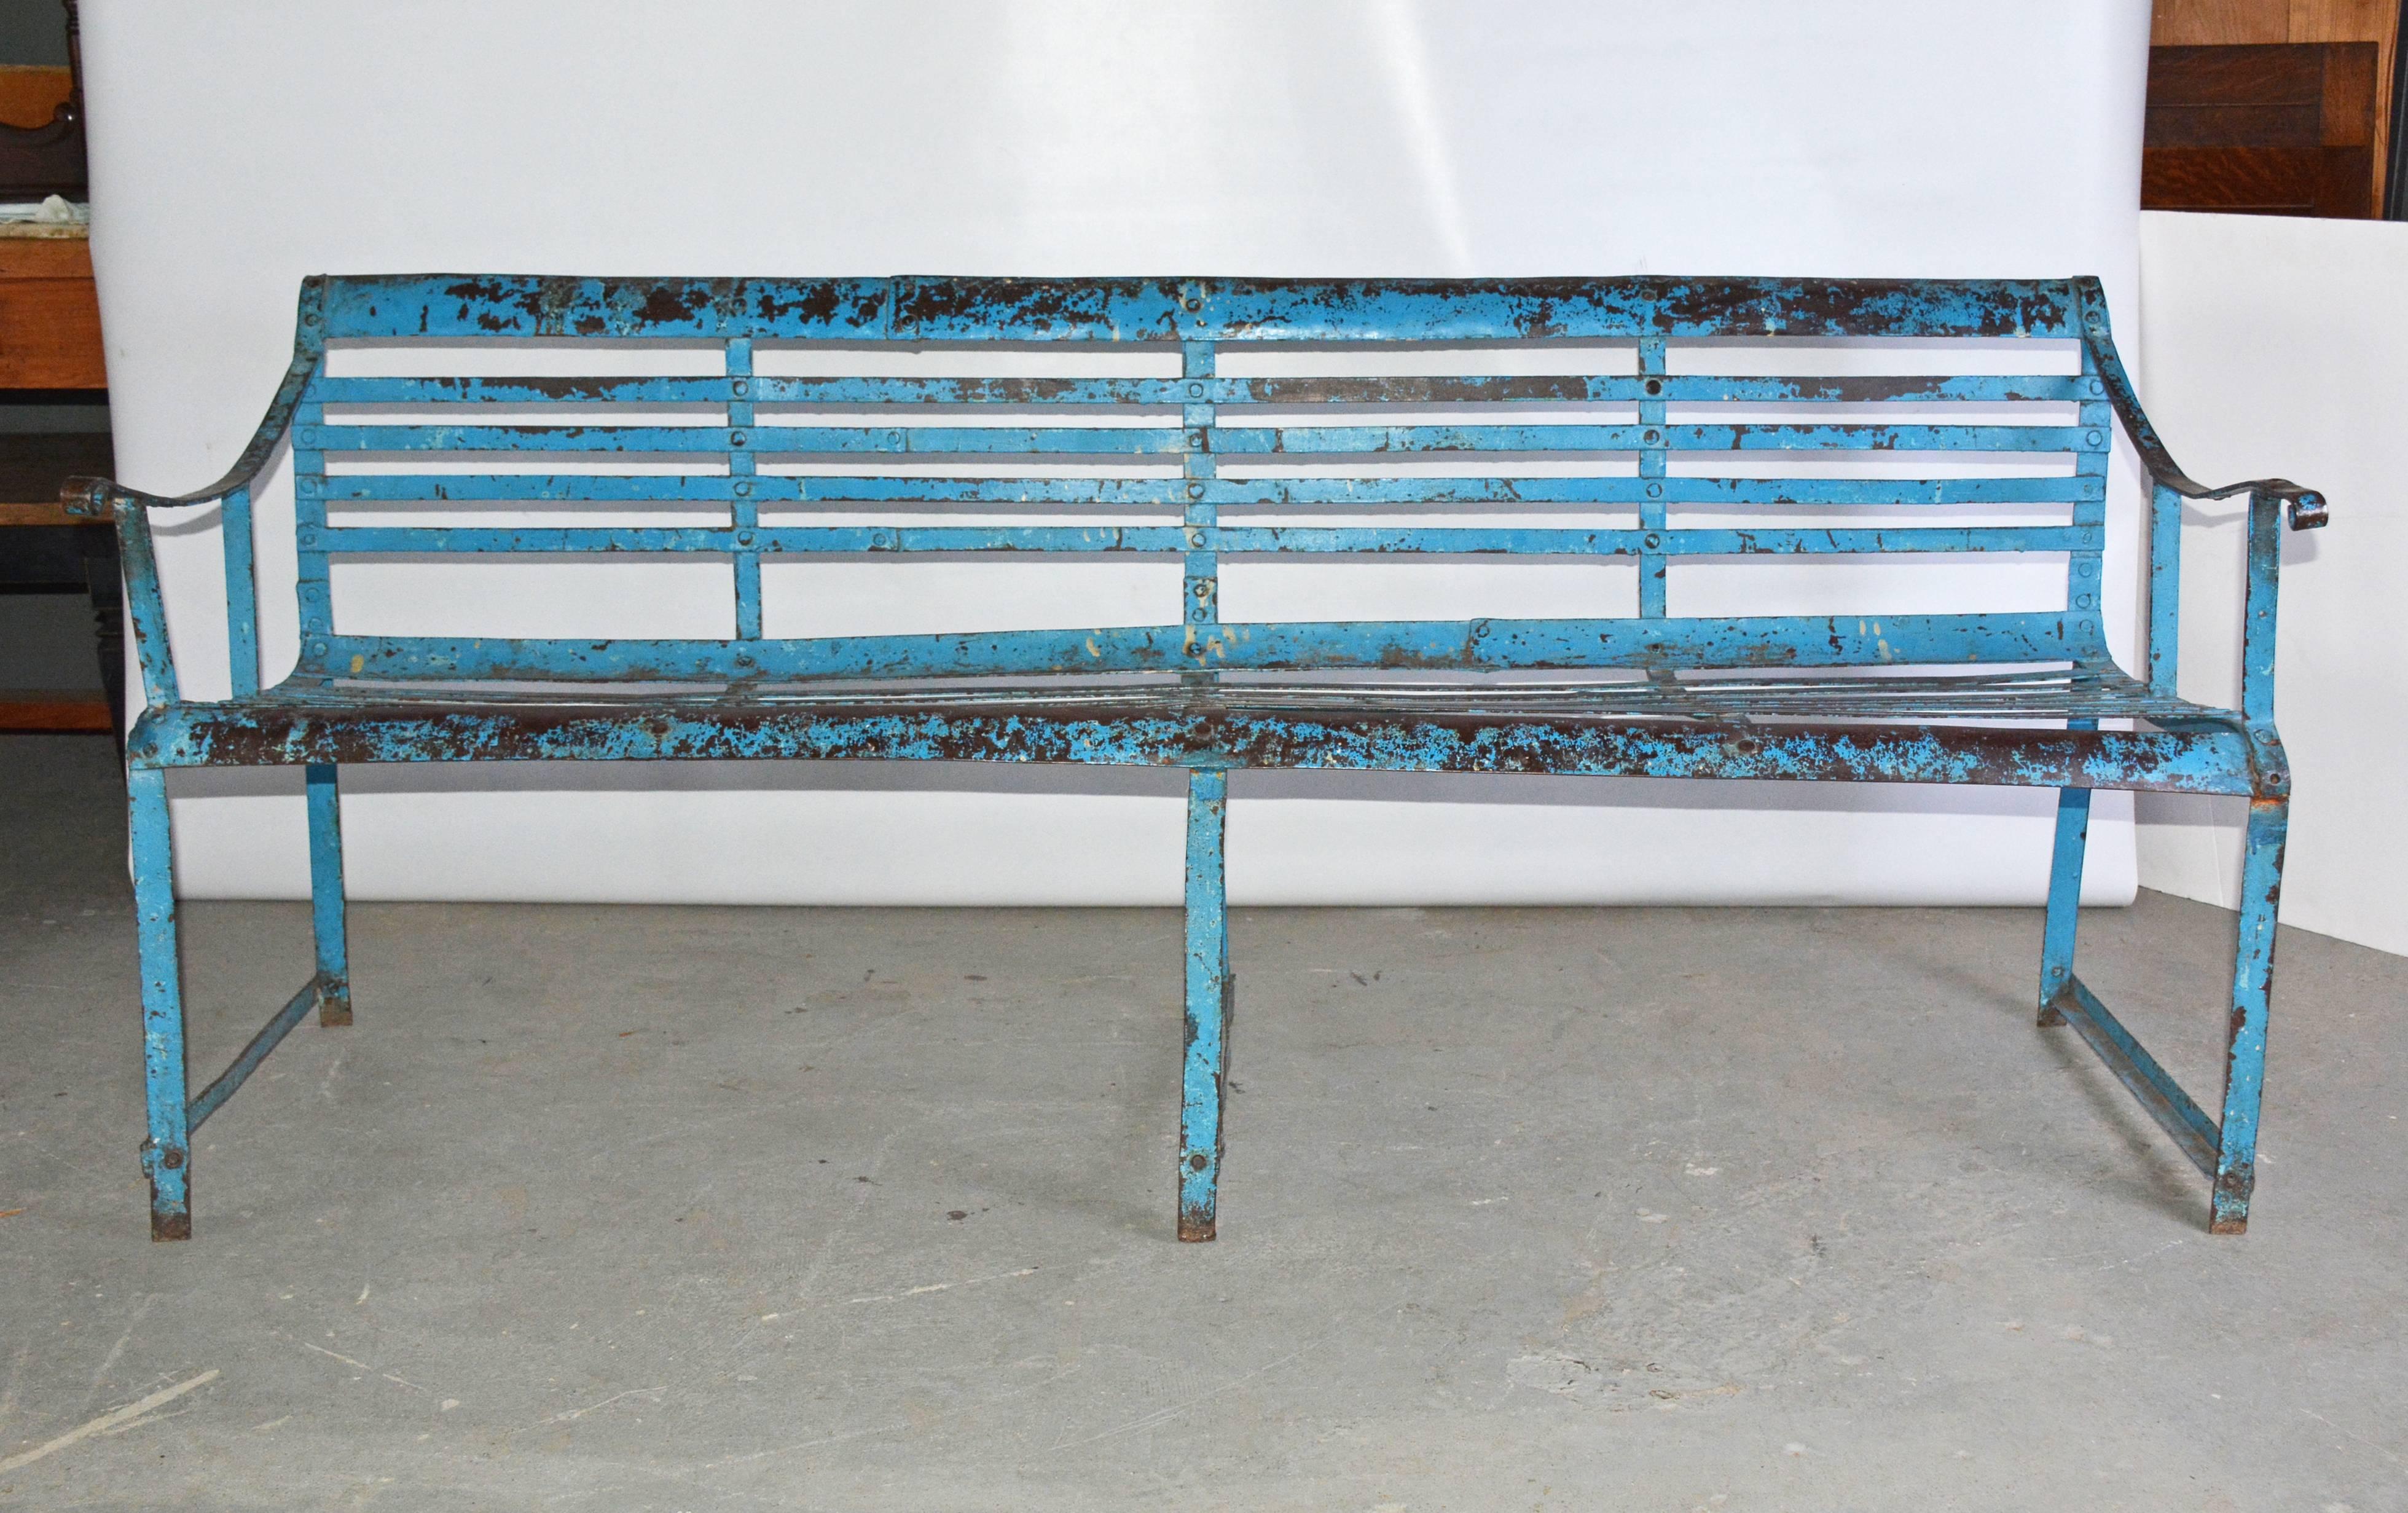 The antique slatted iron bench has a concave seat for comfort. The color is blue-green.

Measures: Seat height: 17